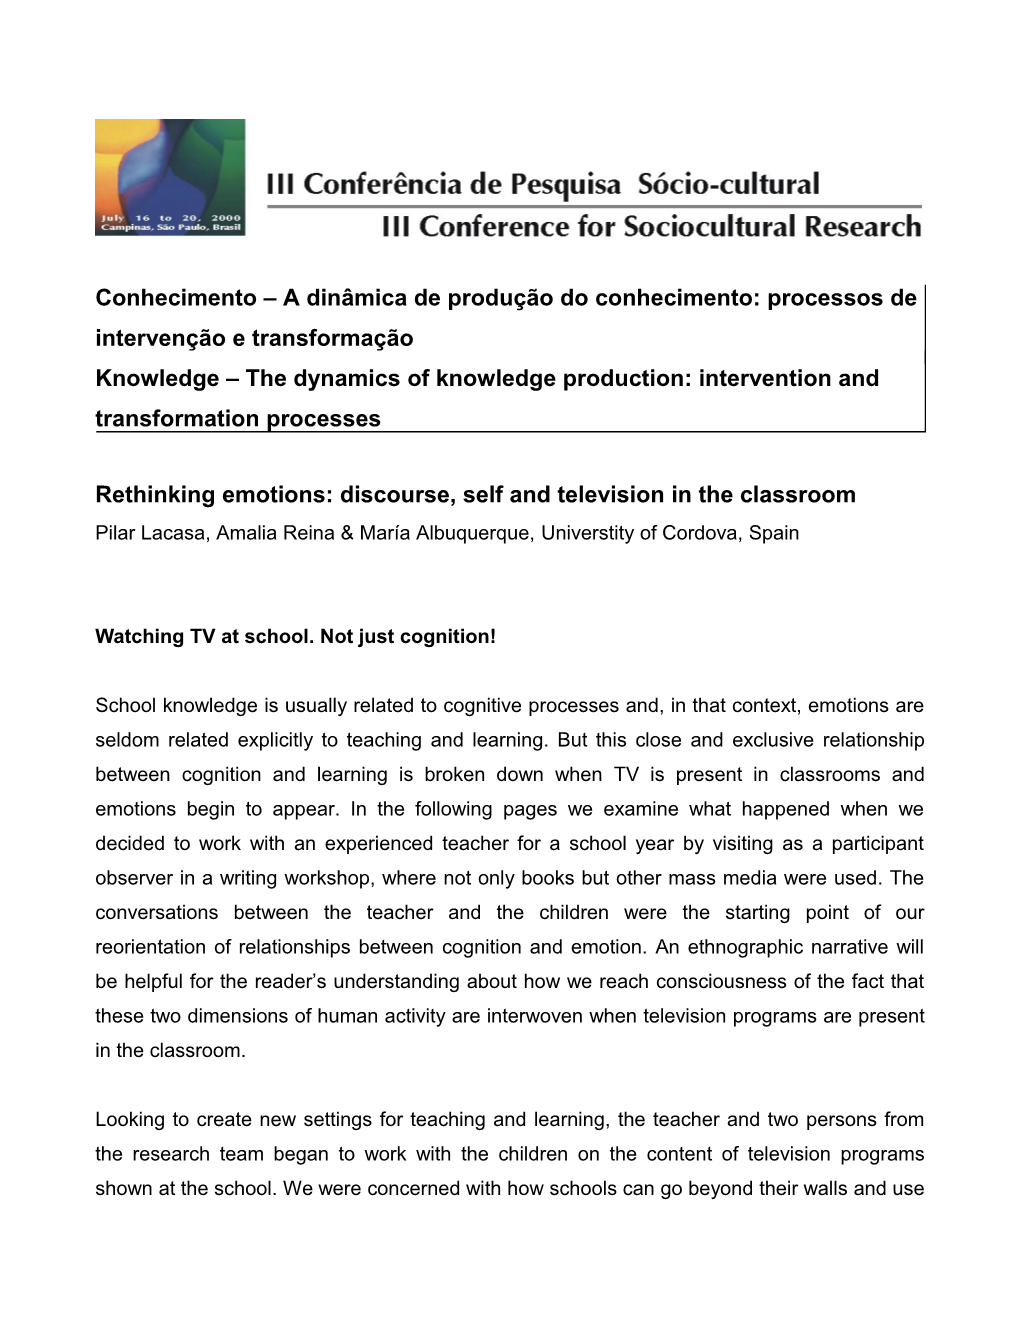 Rethinking Emotions: Discourse, Self, and Television in the Classroom